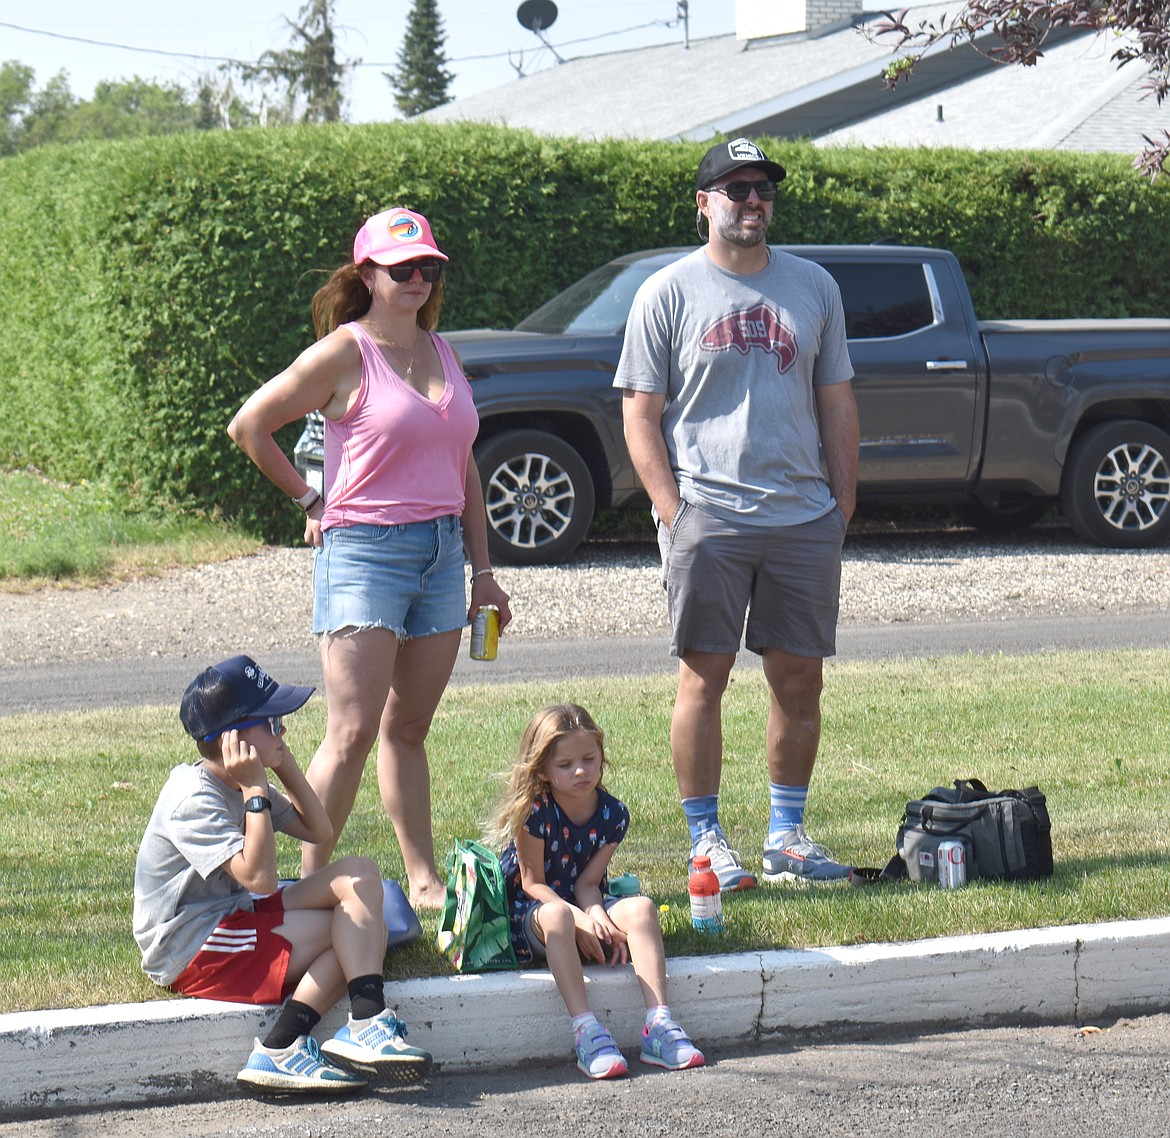 Parade watchers wait on the curb at the 2023 July 4 celebration in George.